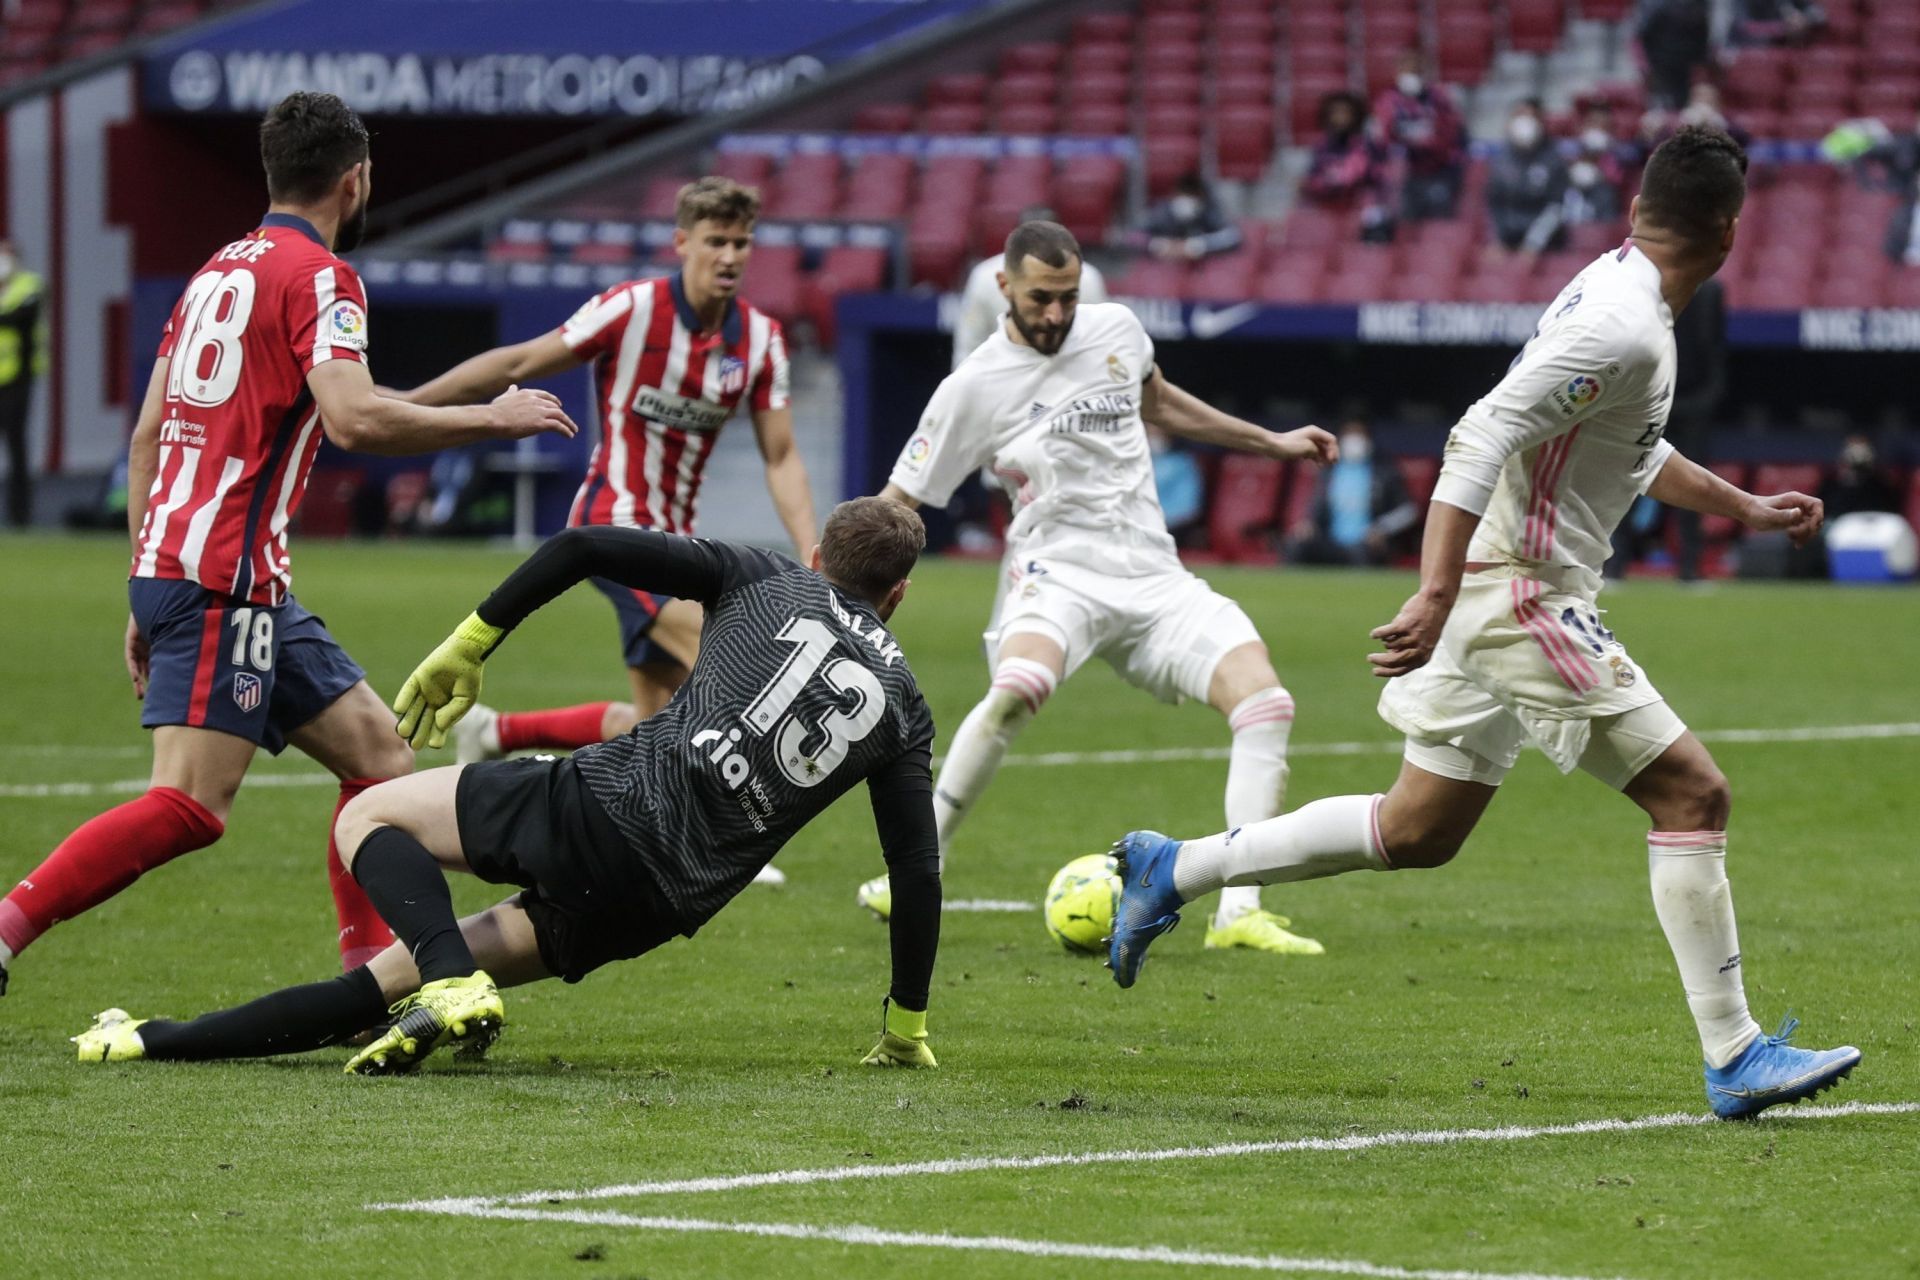 This will be the 228th derby between Real Madrid and Atletico Madrid